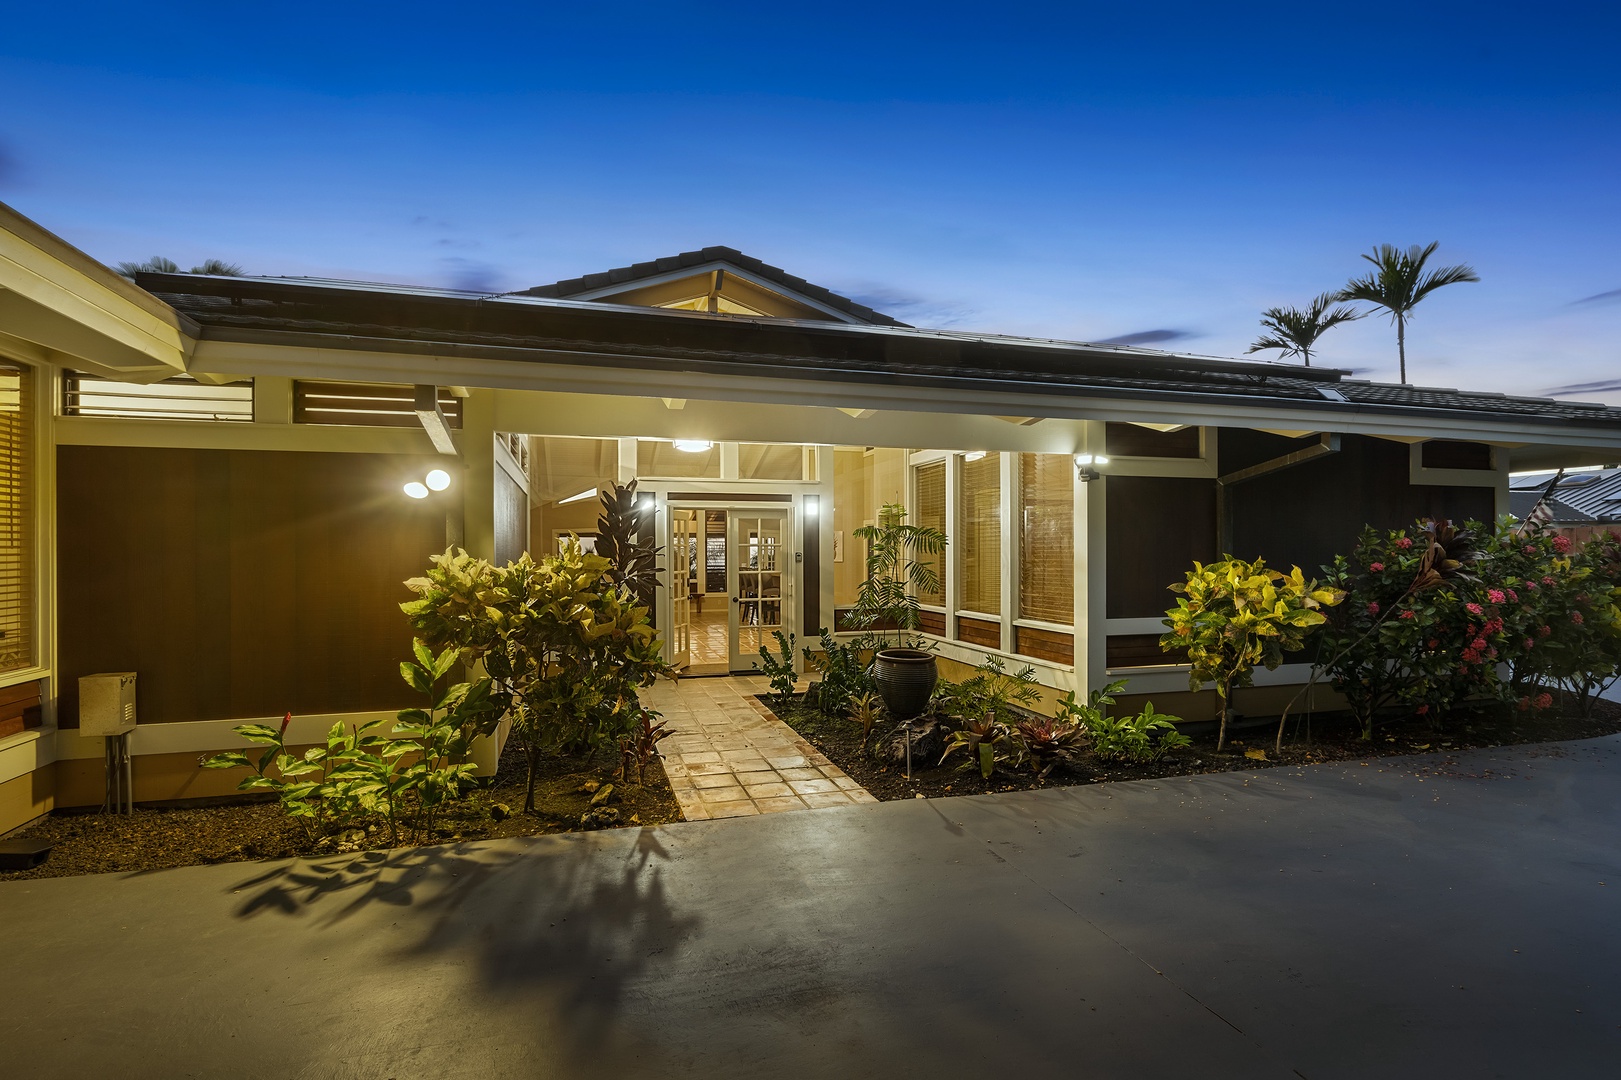 Kailua Kona Vacation Rentals, Pineapple House - Front entry with lush manicured plants